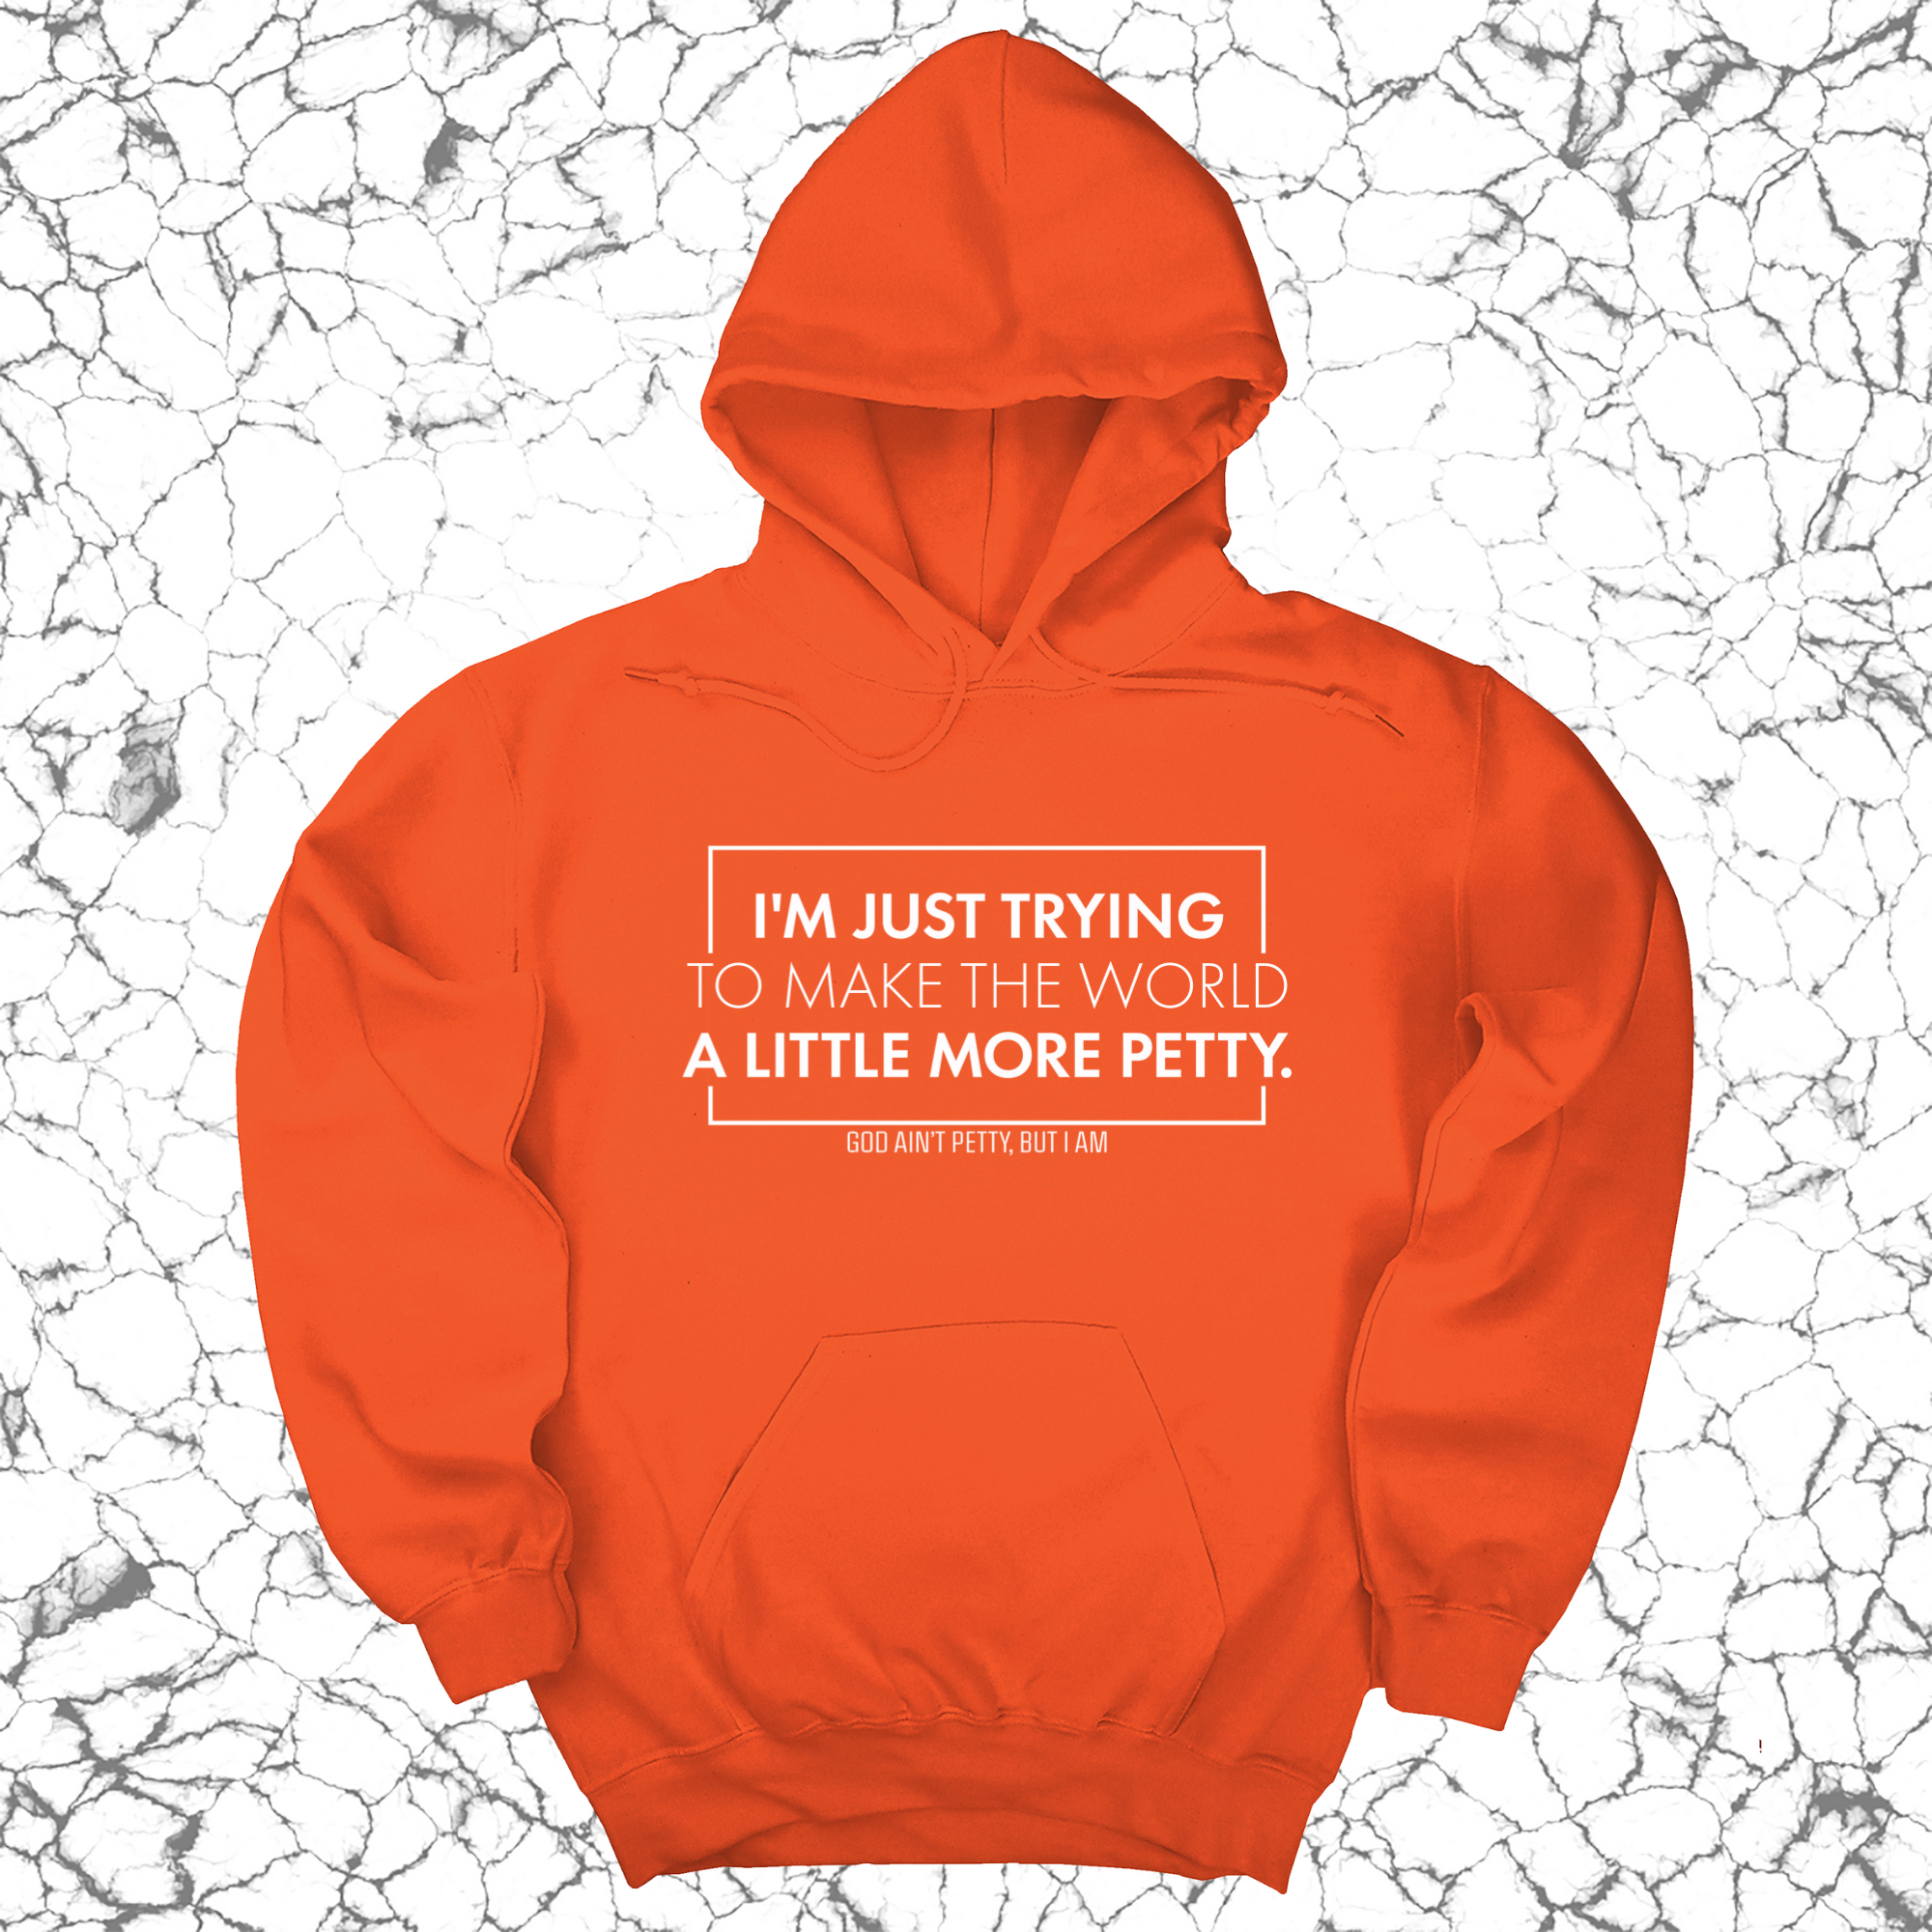 I'm just trying to make the world a little more petty Unisex Hoodie-Hoodie-The Original God Ain't Petty But I Am